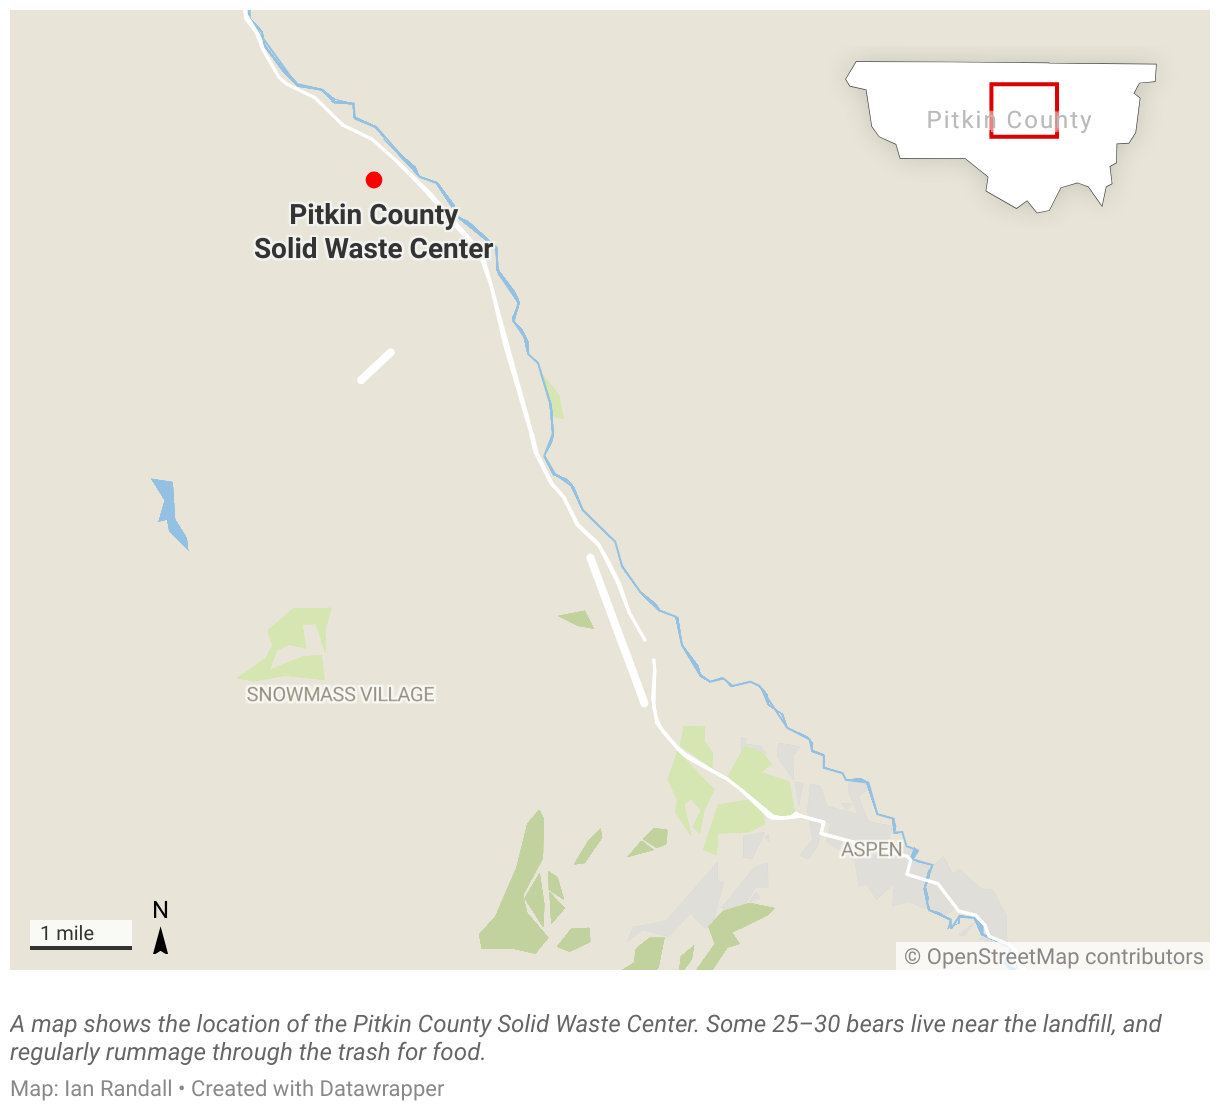 A map shows the location of the Pitkin County Solid Waste Center.